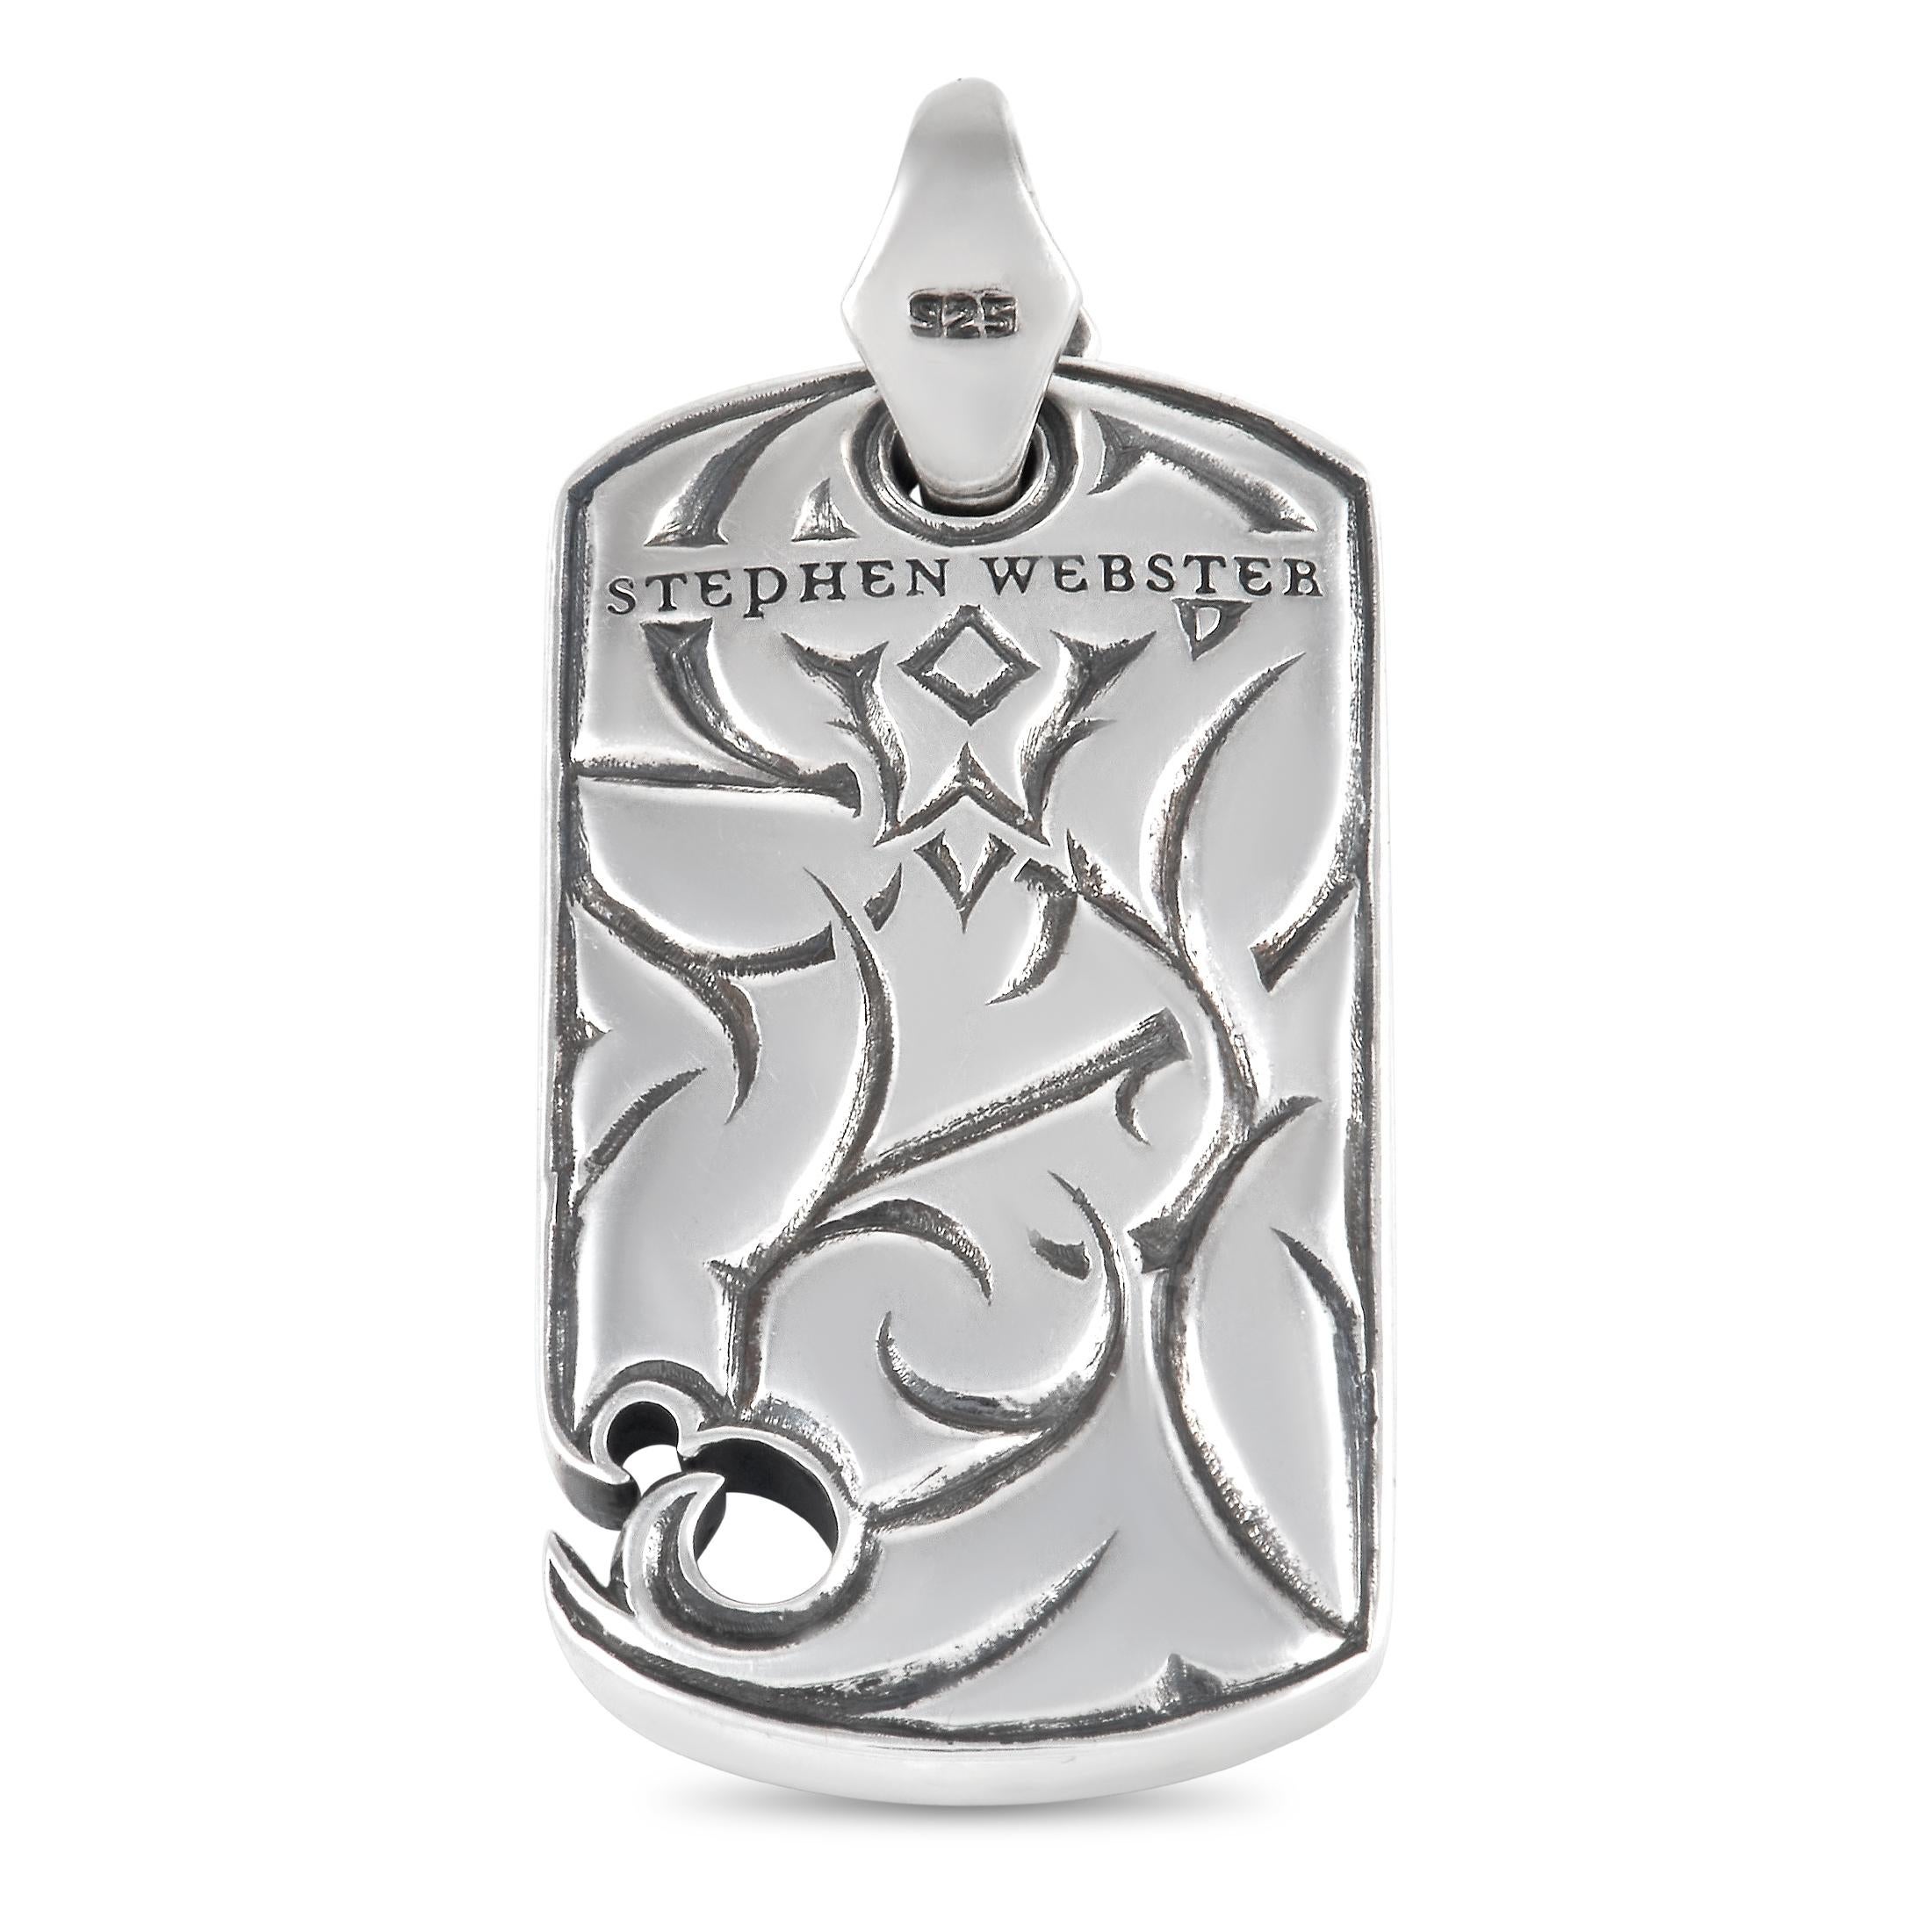 This piece from the Stephen Webster Thorn collection possesses a bold, confident sense of style. Crafted from sterling silver, this dog tag style pendant measures 1.75” long and 0.75” wide. It’s accented by intricate metalwork, Rayskin leather, and